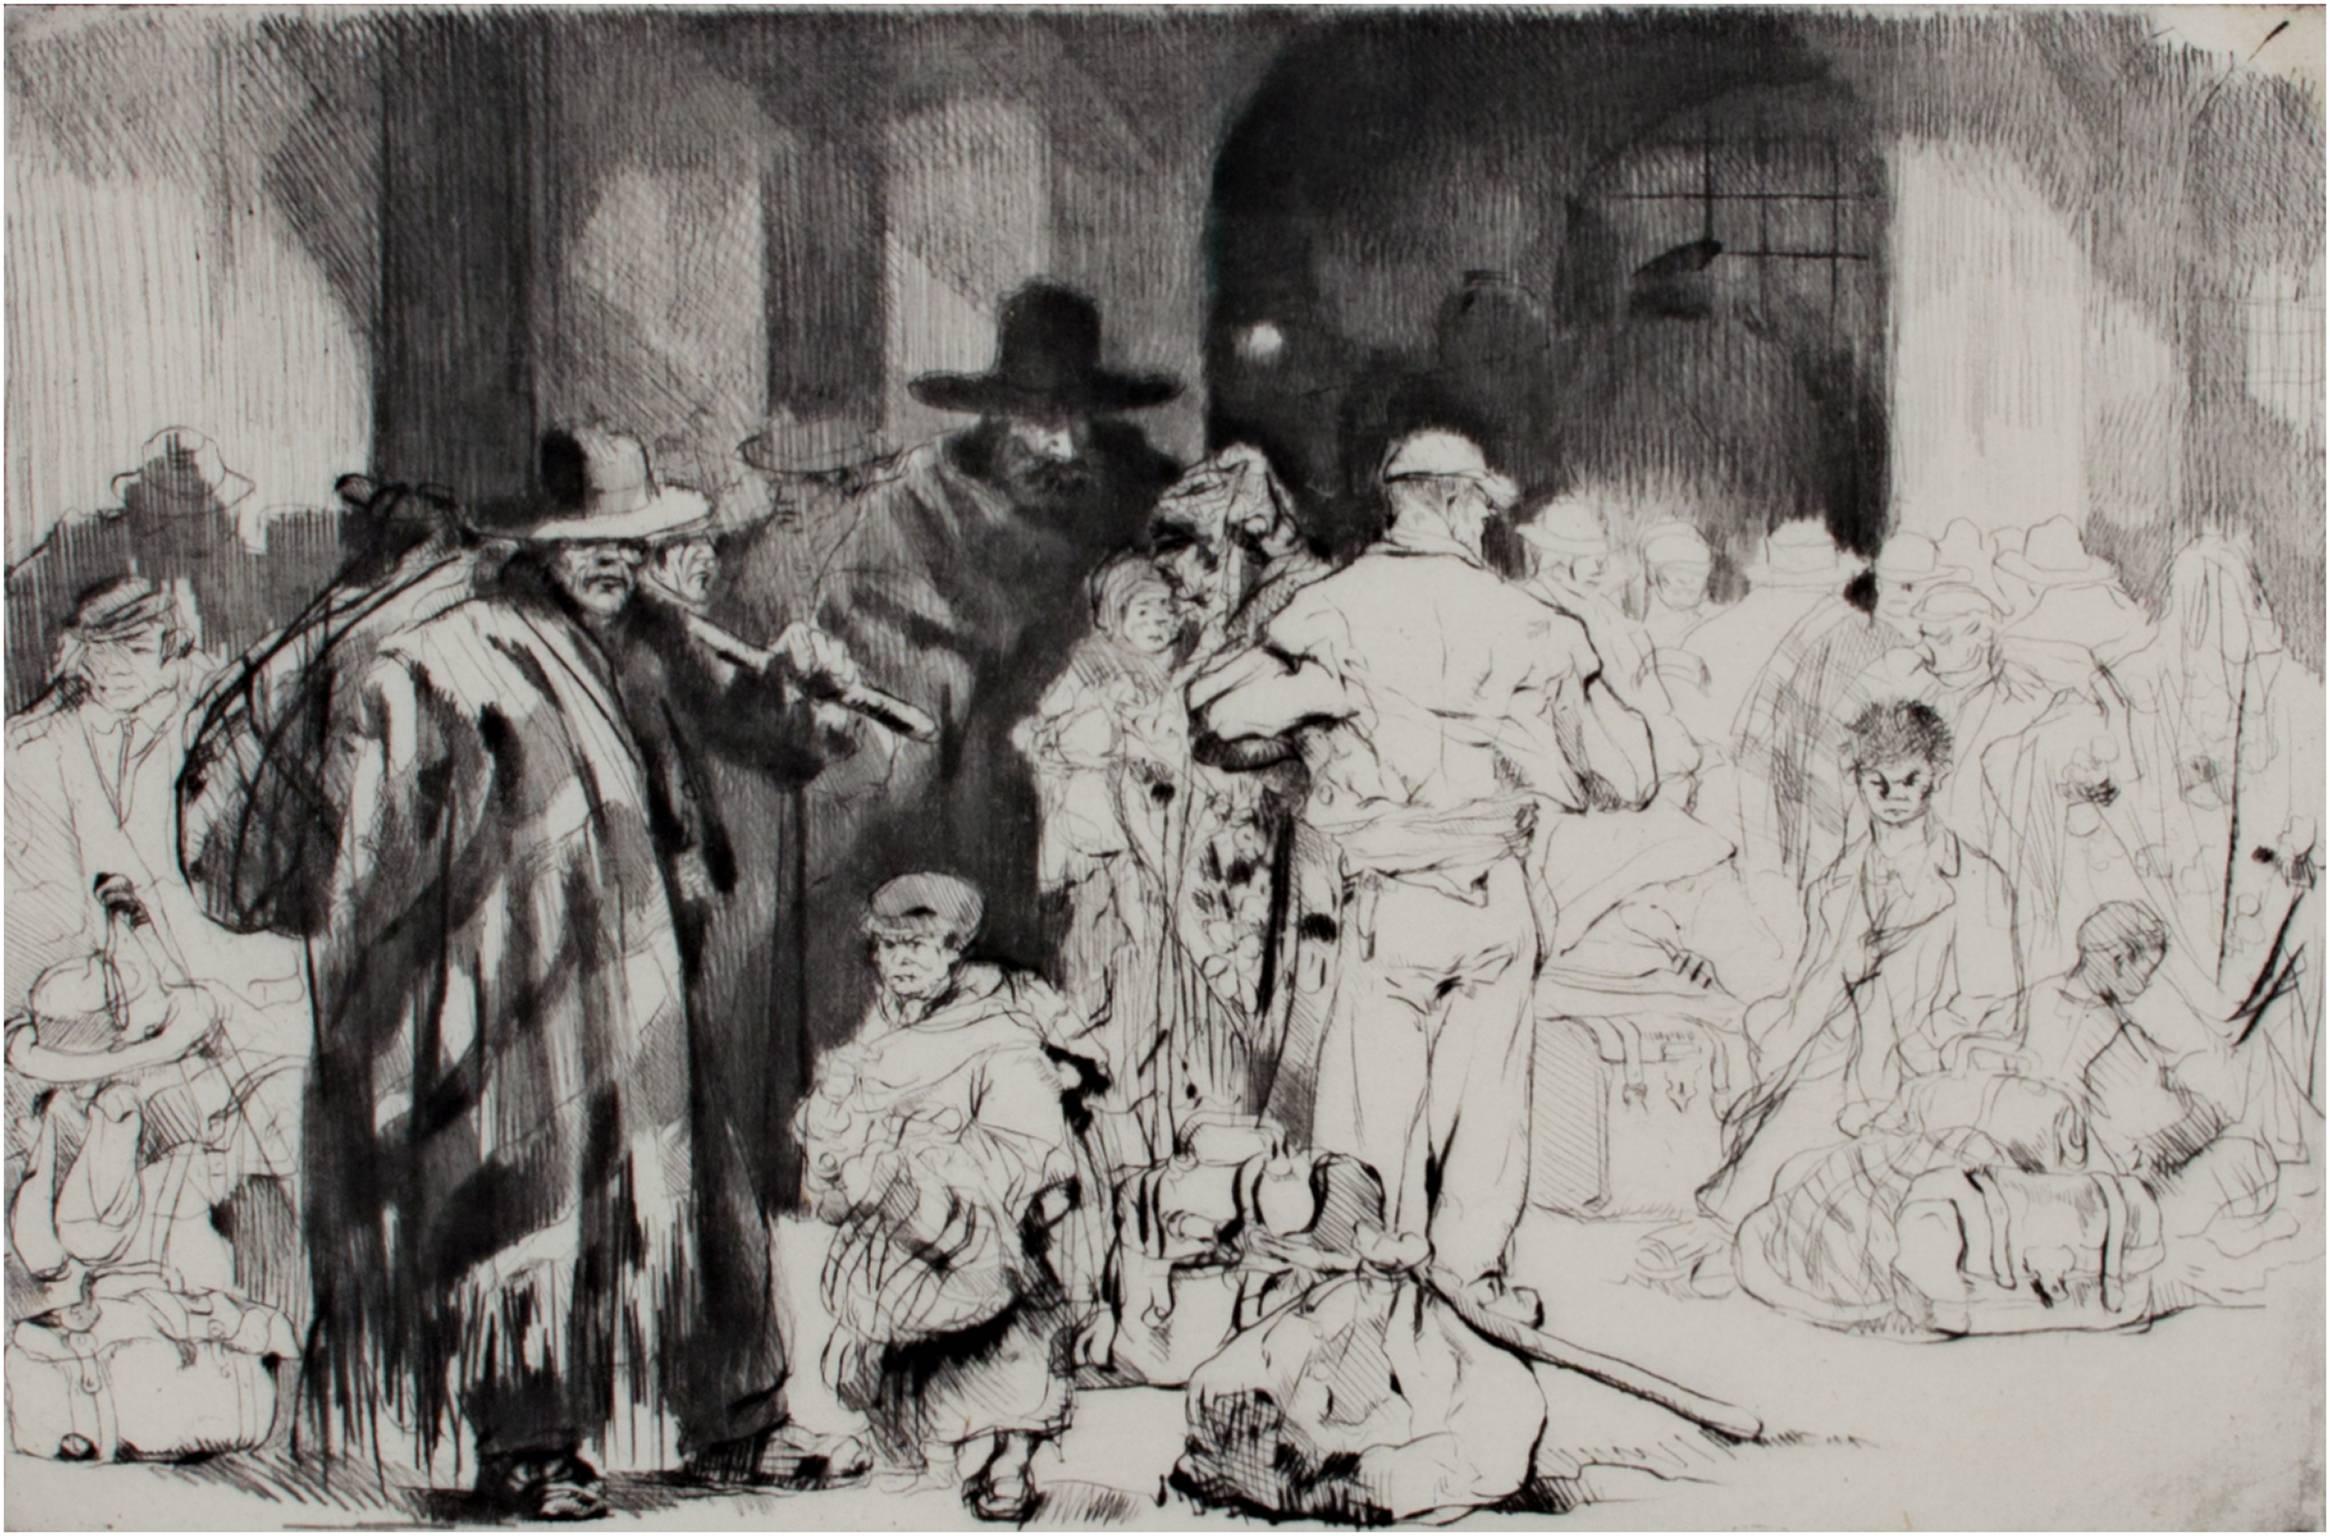 "Les Emigrants," Roller Engraving of Figures signed by Auguste Brouet